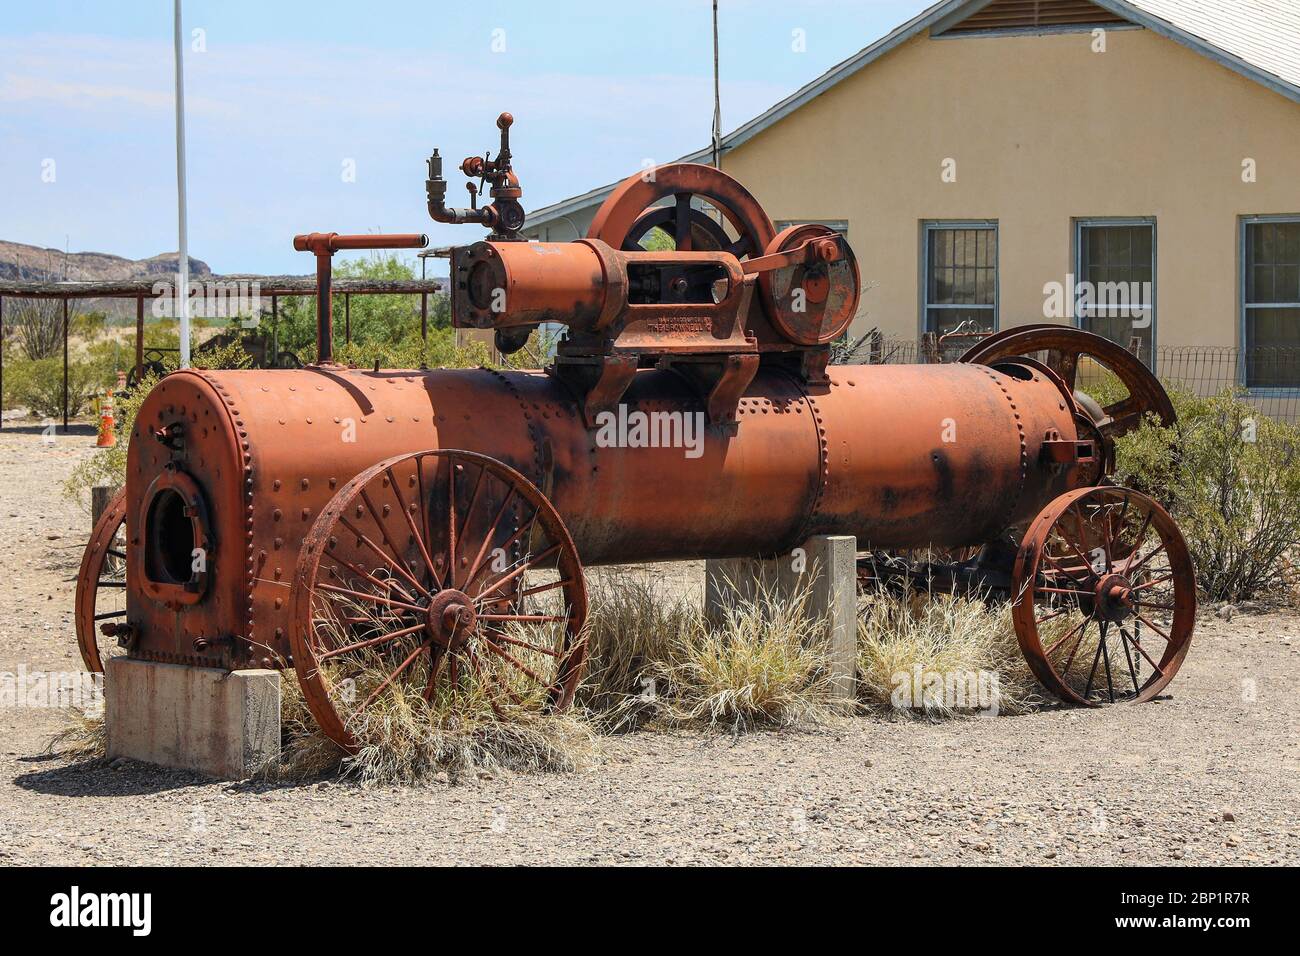 Abandoned Brownell  irrigation pump once used in support of farming in the Castolon area of Big Bend National Park, Texas Stock Photo